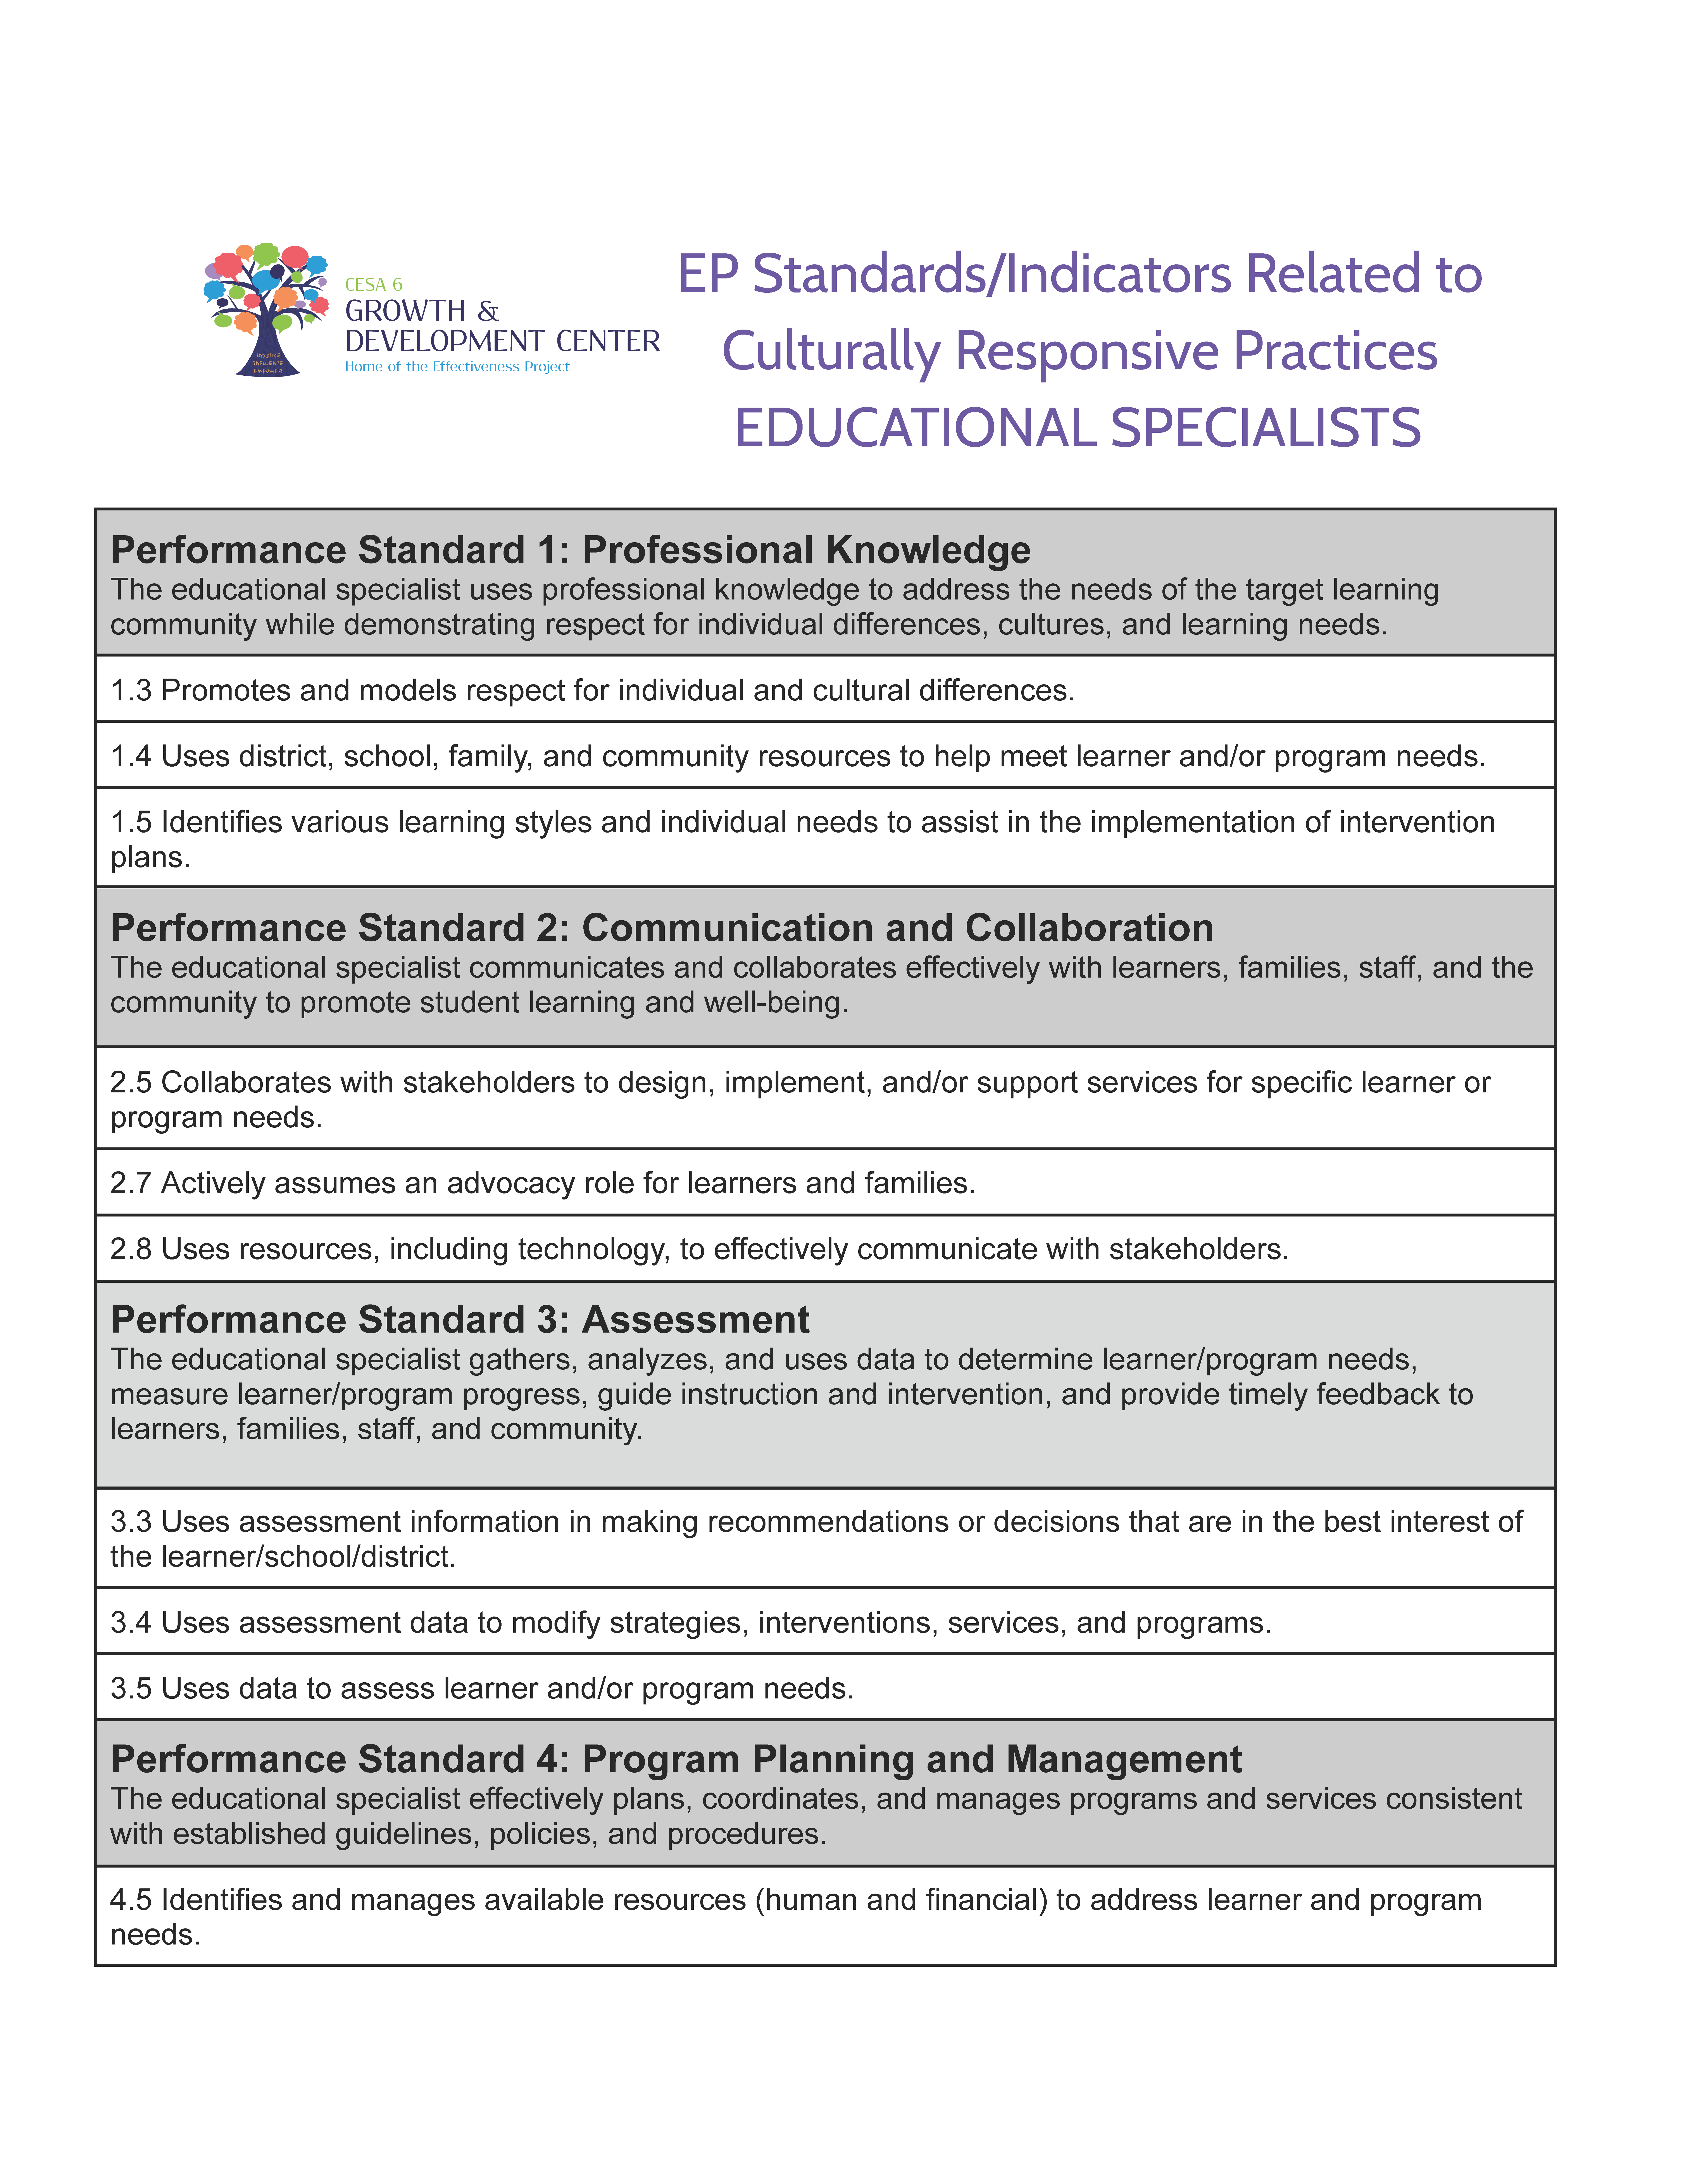 Culturally_Responsive_EP_Standards_-_Educational_Specialists_Page_1.png